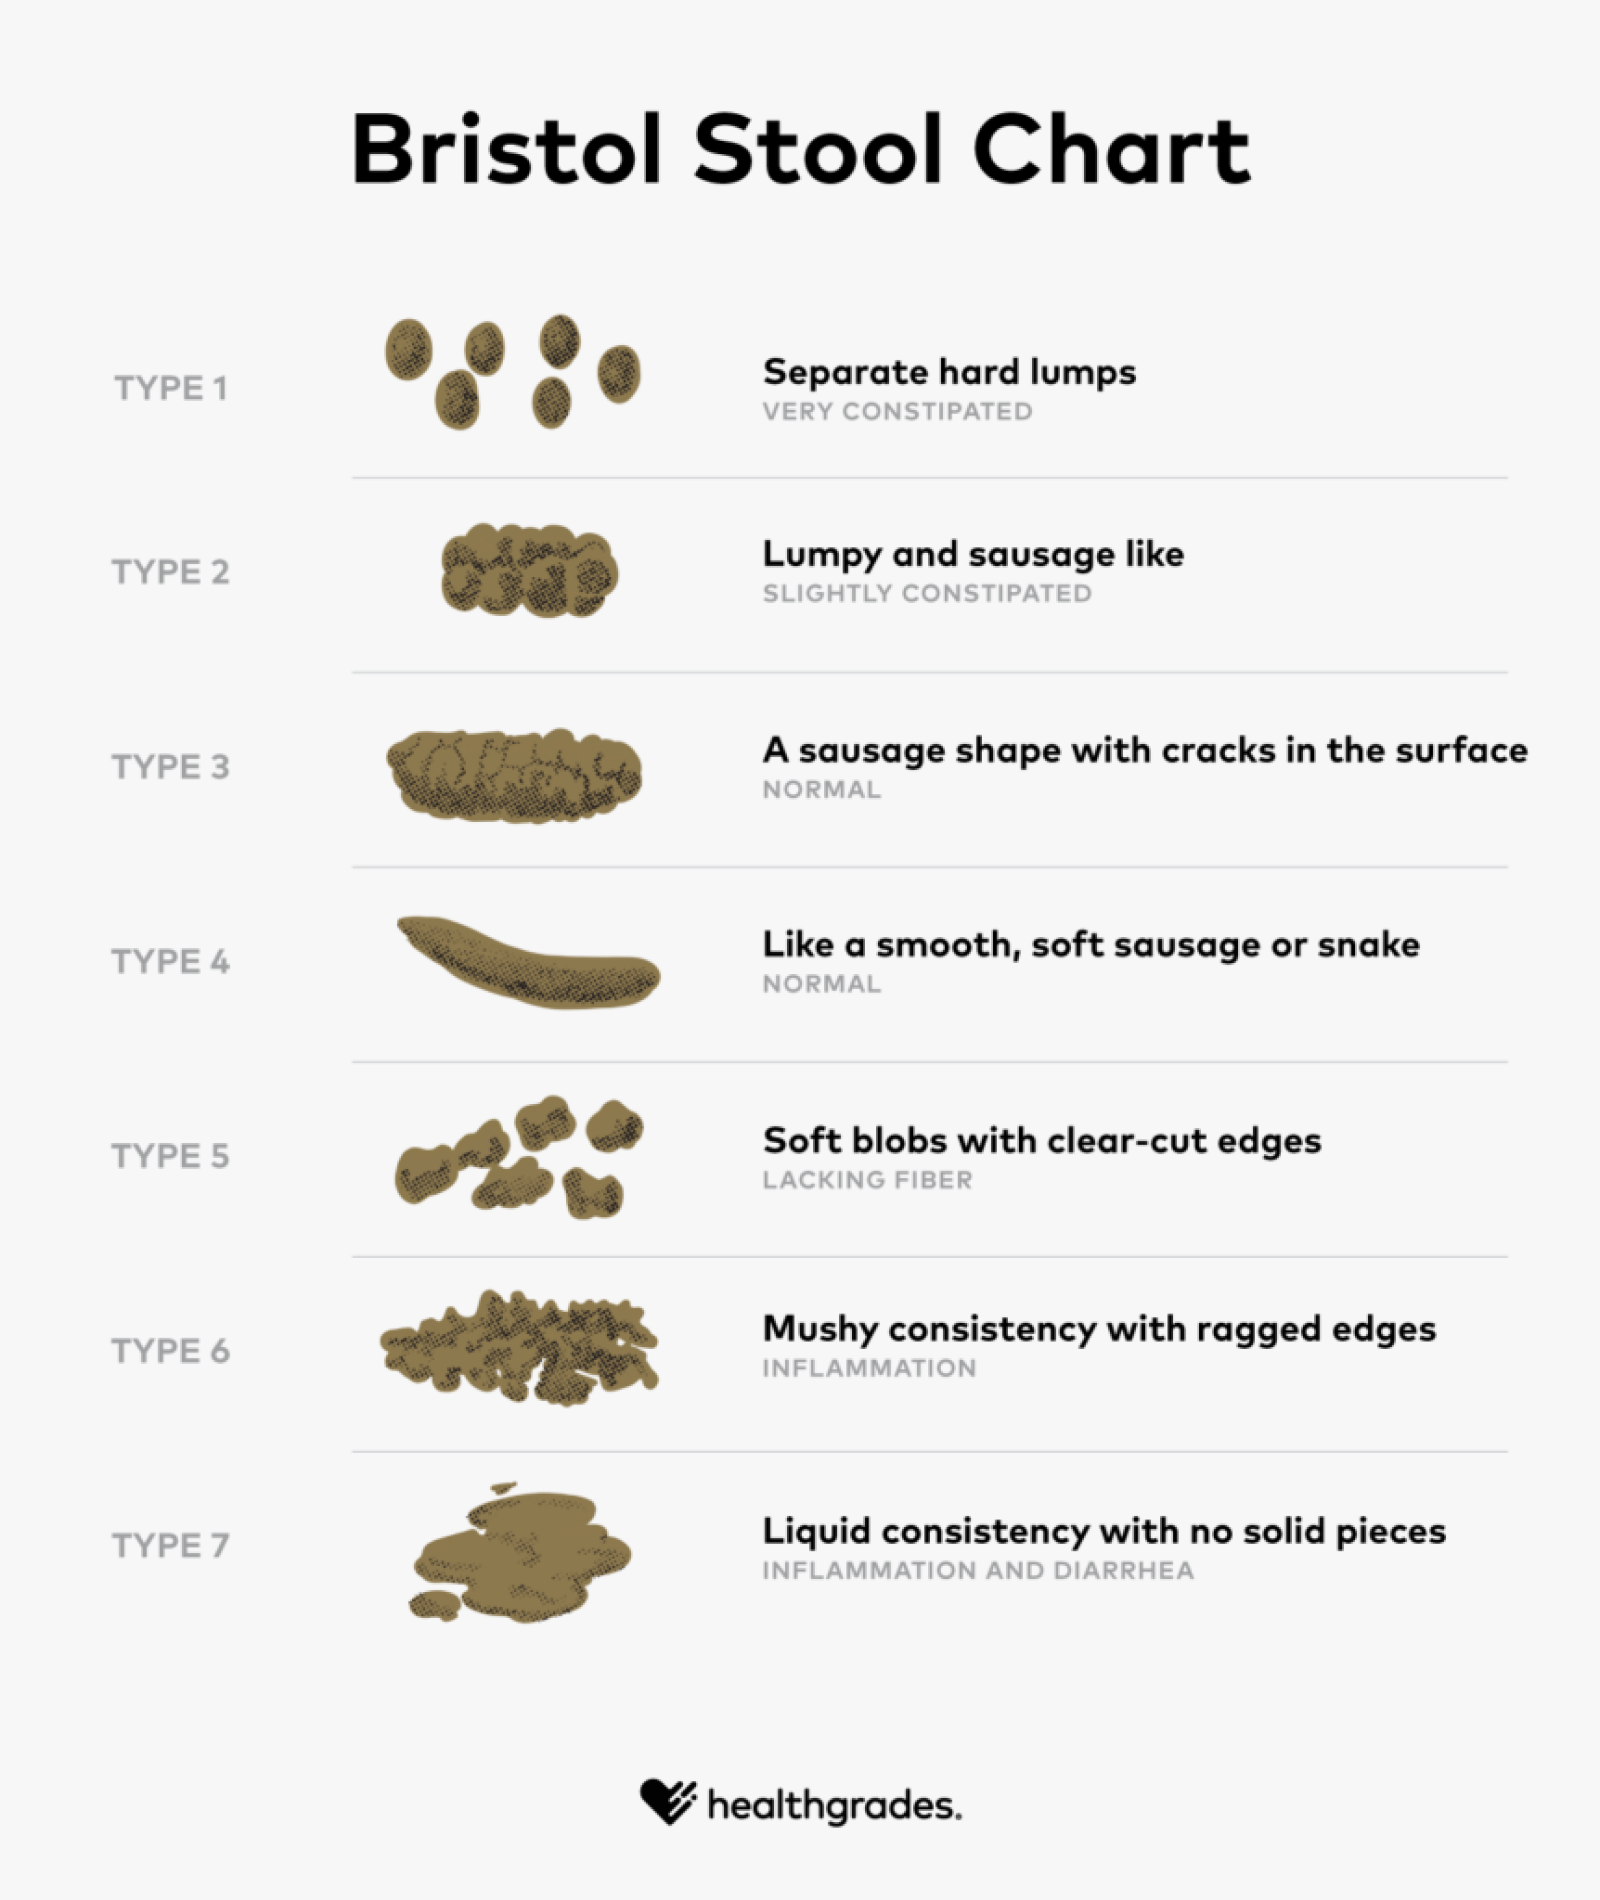 Bristol Stool Chart: What Does a Healthy Stool Look Like?